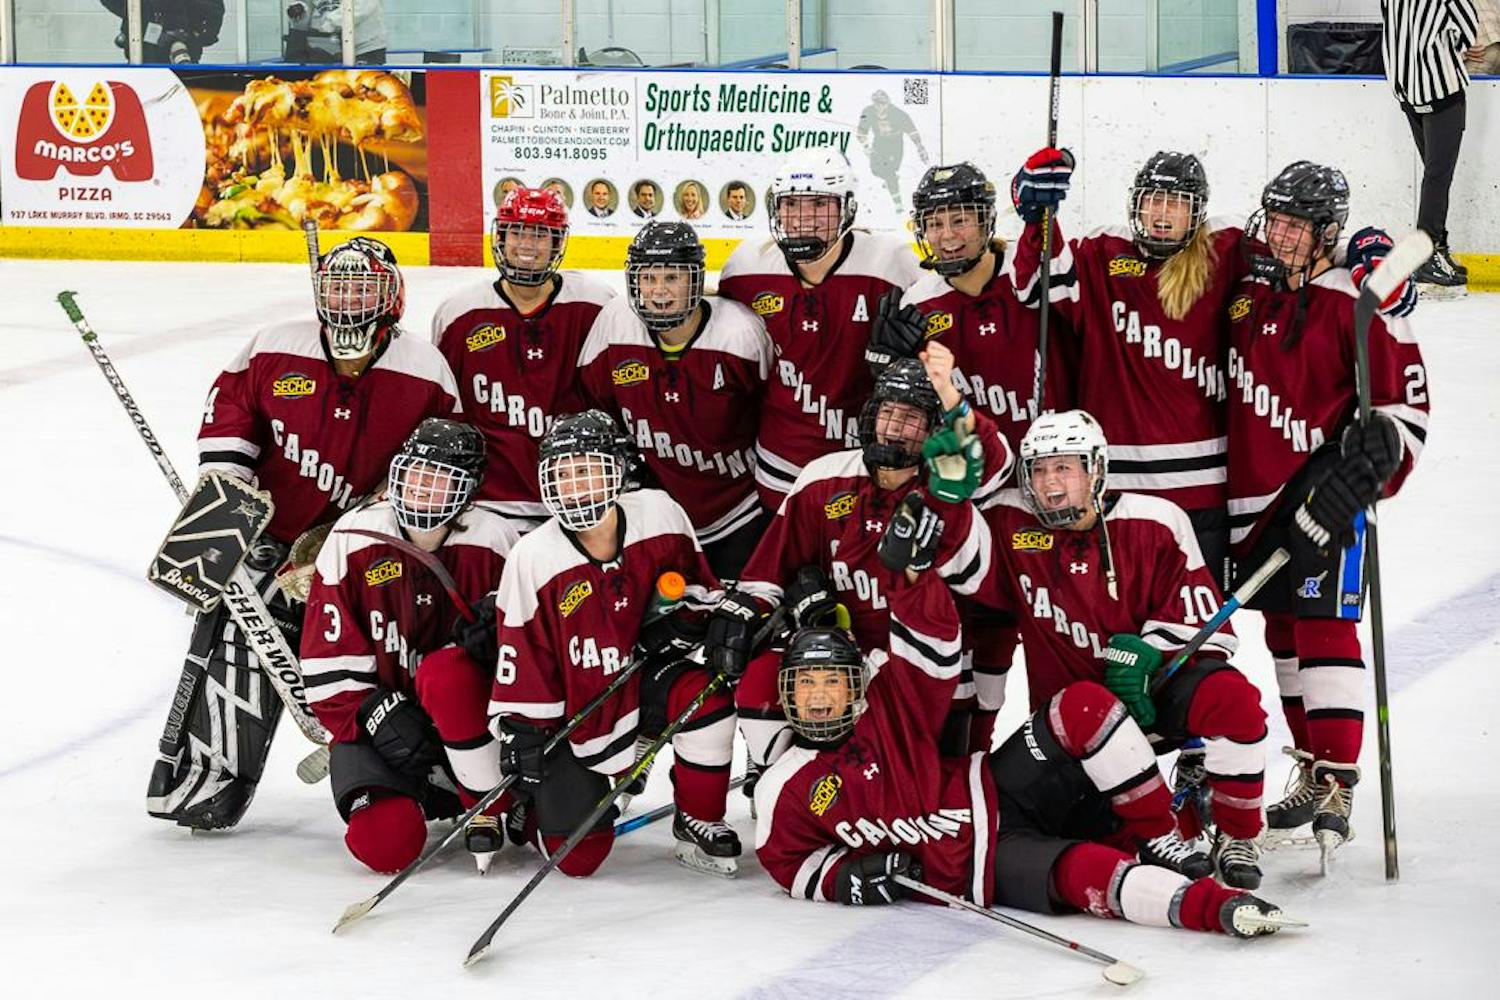 The Carolina women's club hockey team celebrates after its 2-1 victory against the South Carolina Lady Warriors on Oct. 1, 2023 in Irmo, S.C. This matchup marks the first recorded female hockey game in the 222-year history of USC.